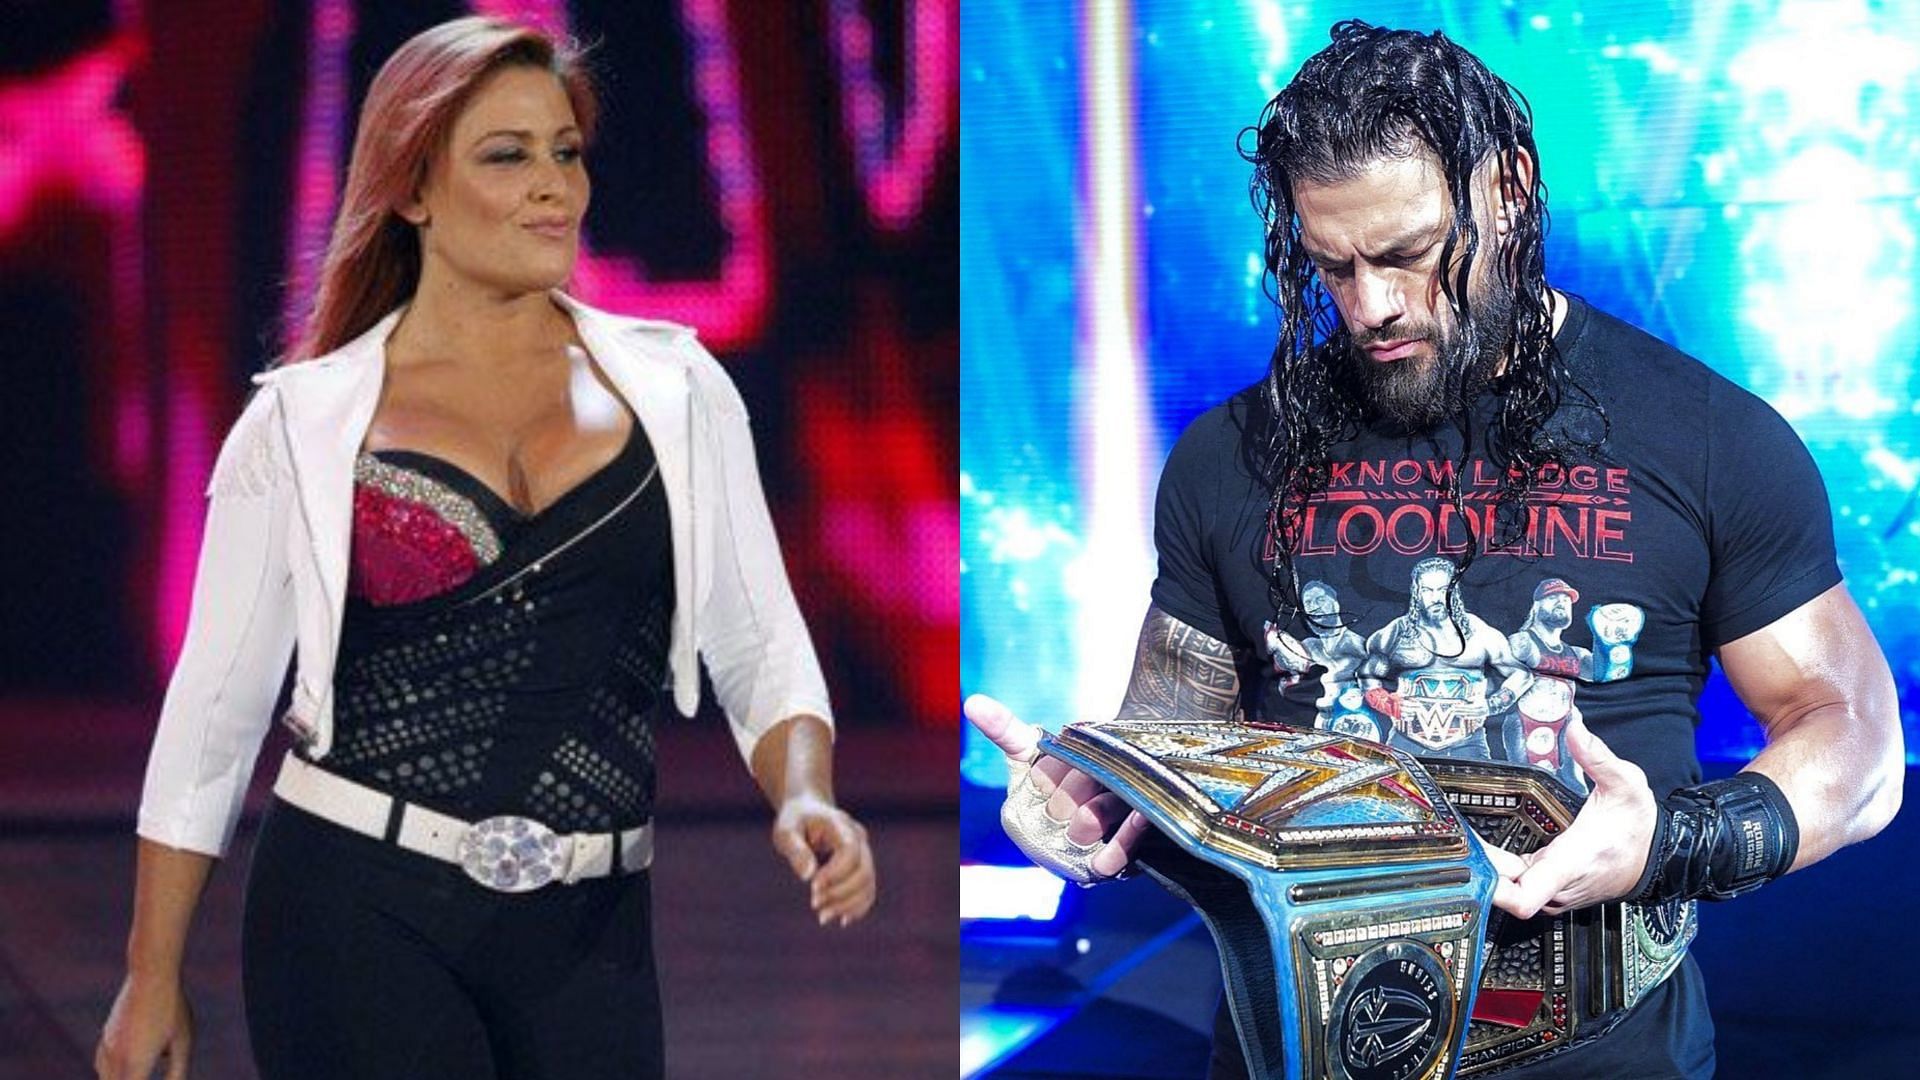 Natalya (left) and the Undisputed WWE Universal Champion Roman Reigns (right)